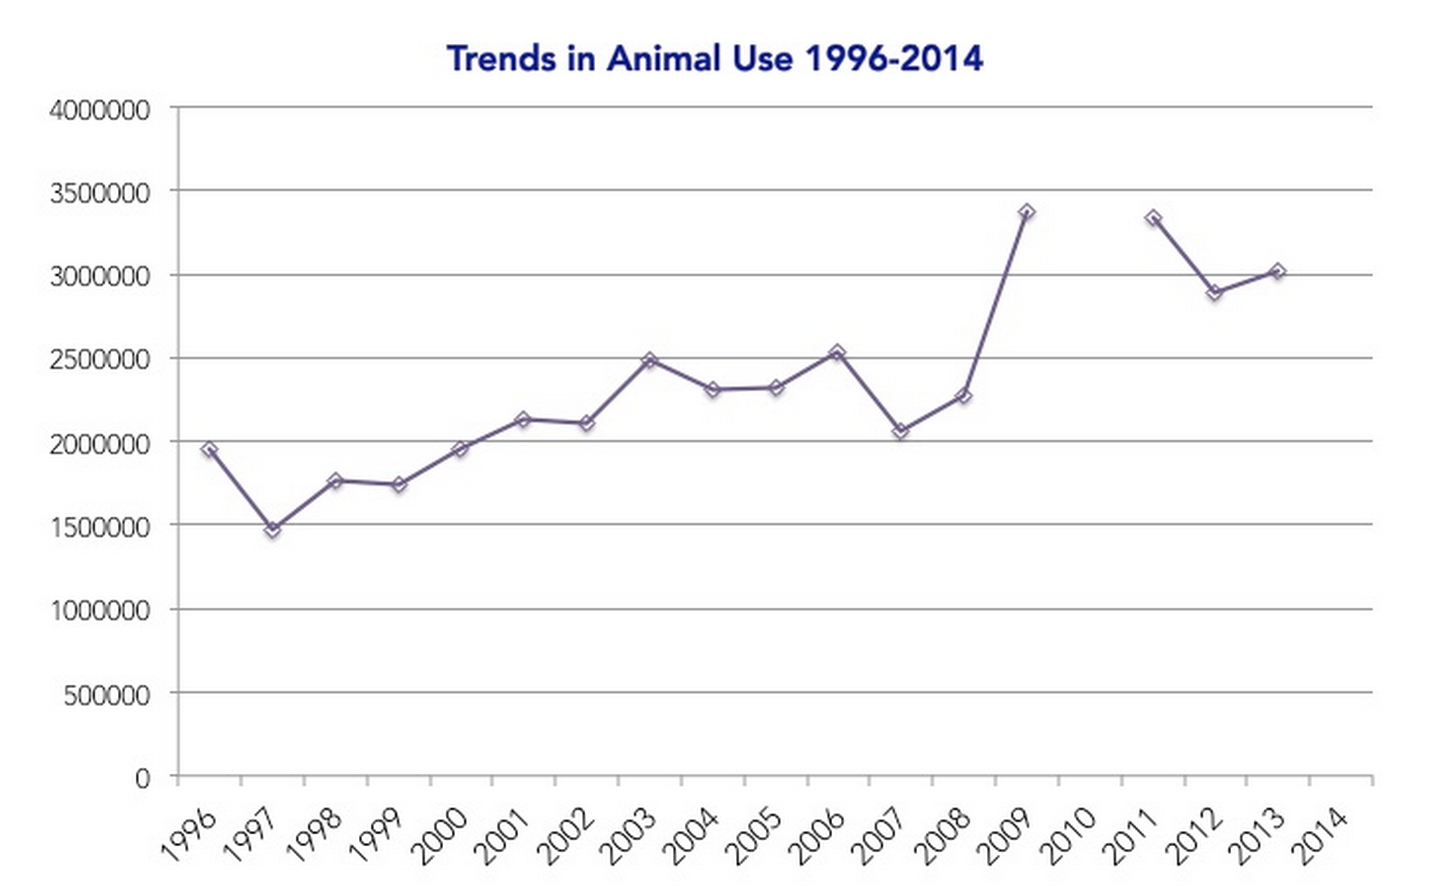 Animals in Science Policy Institute, Canadian Council on Animal Care